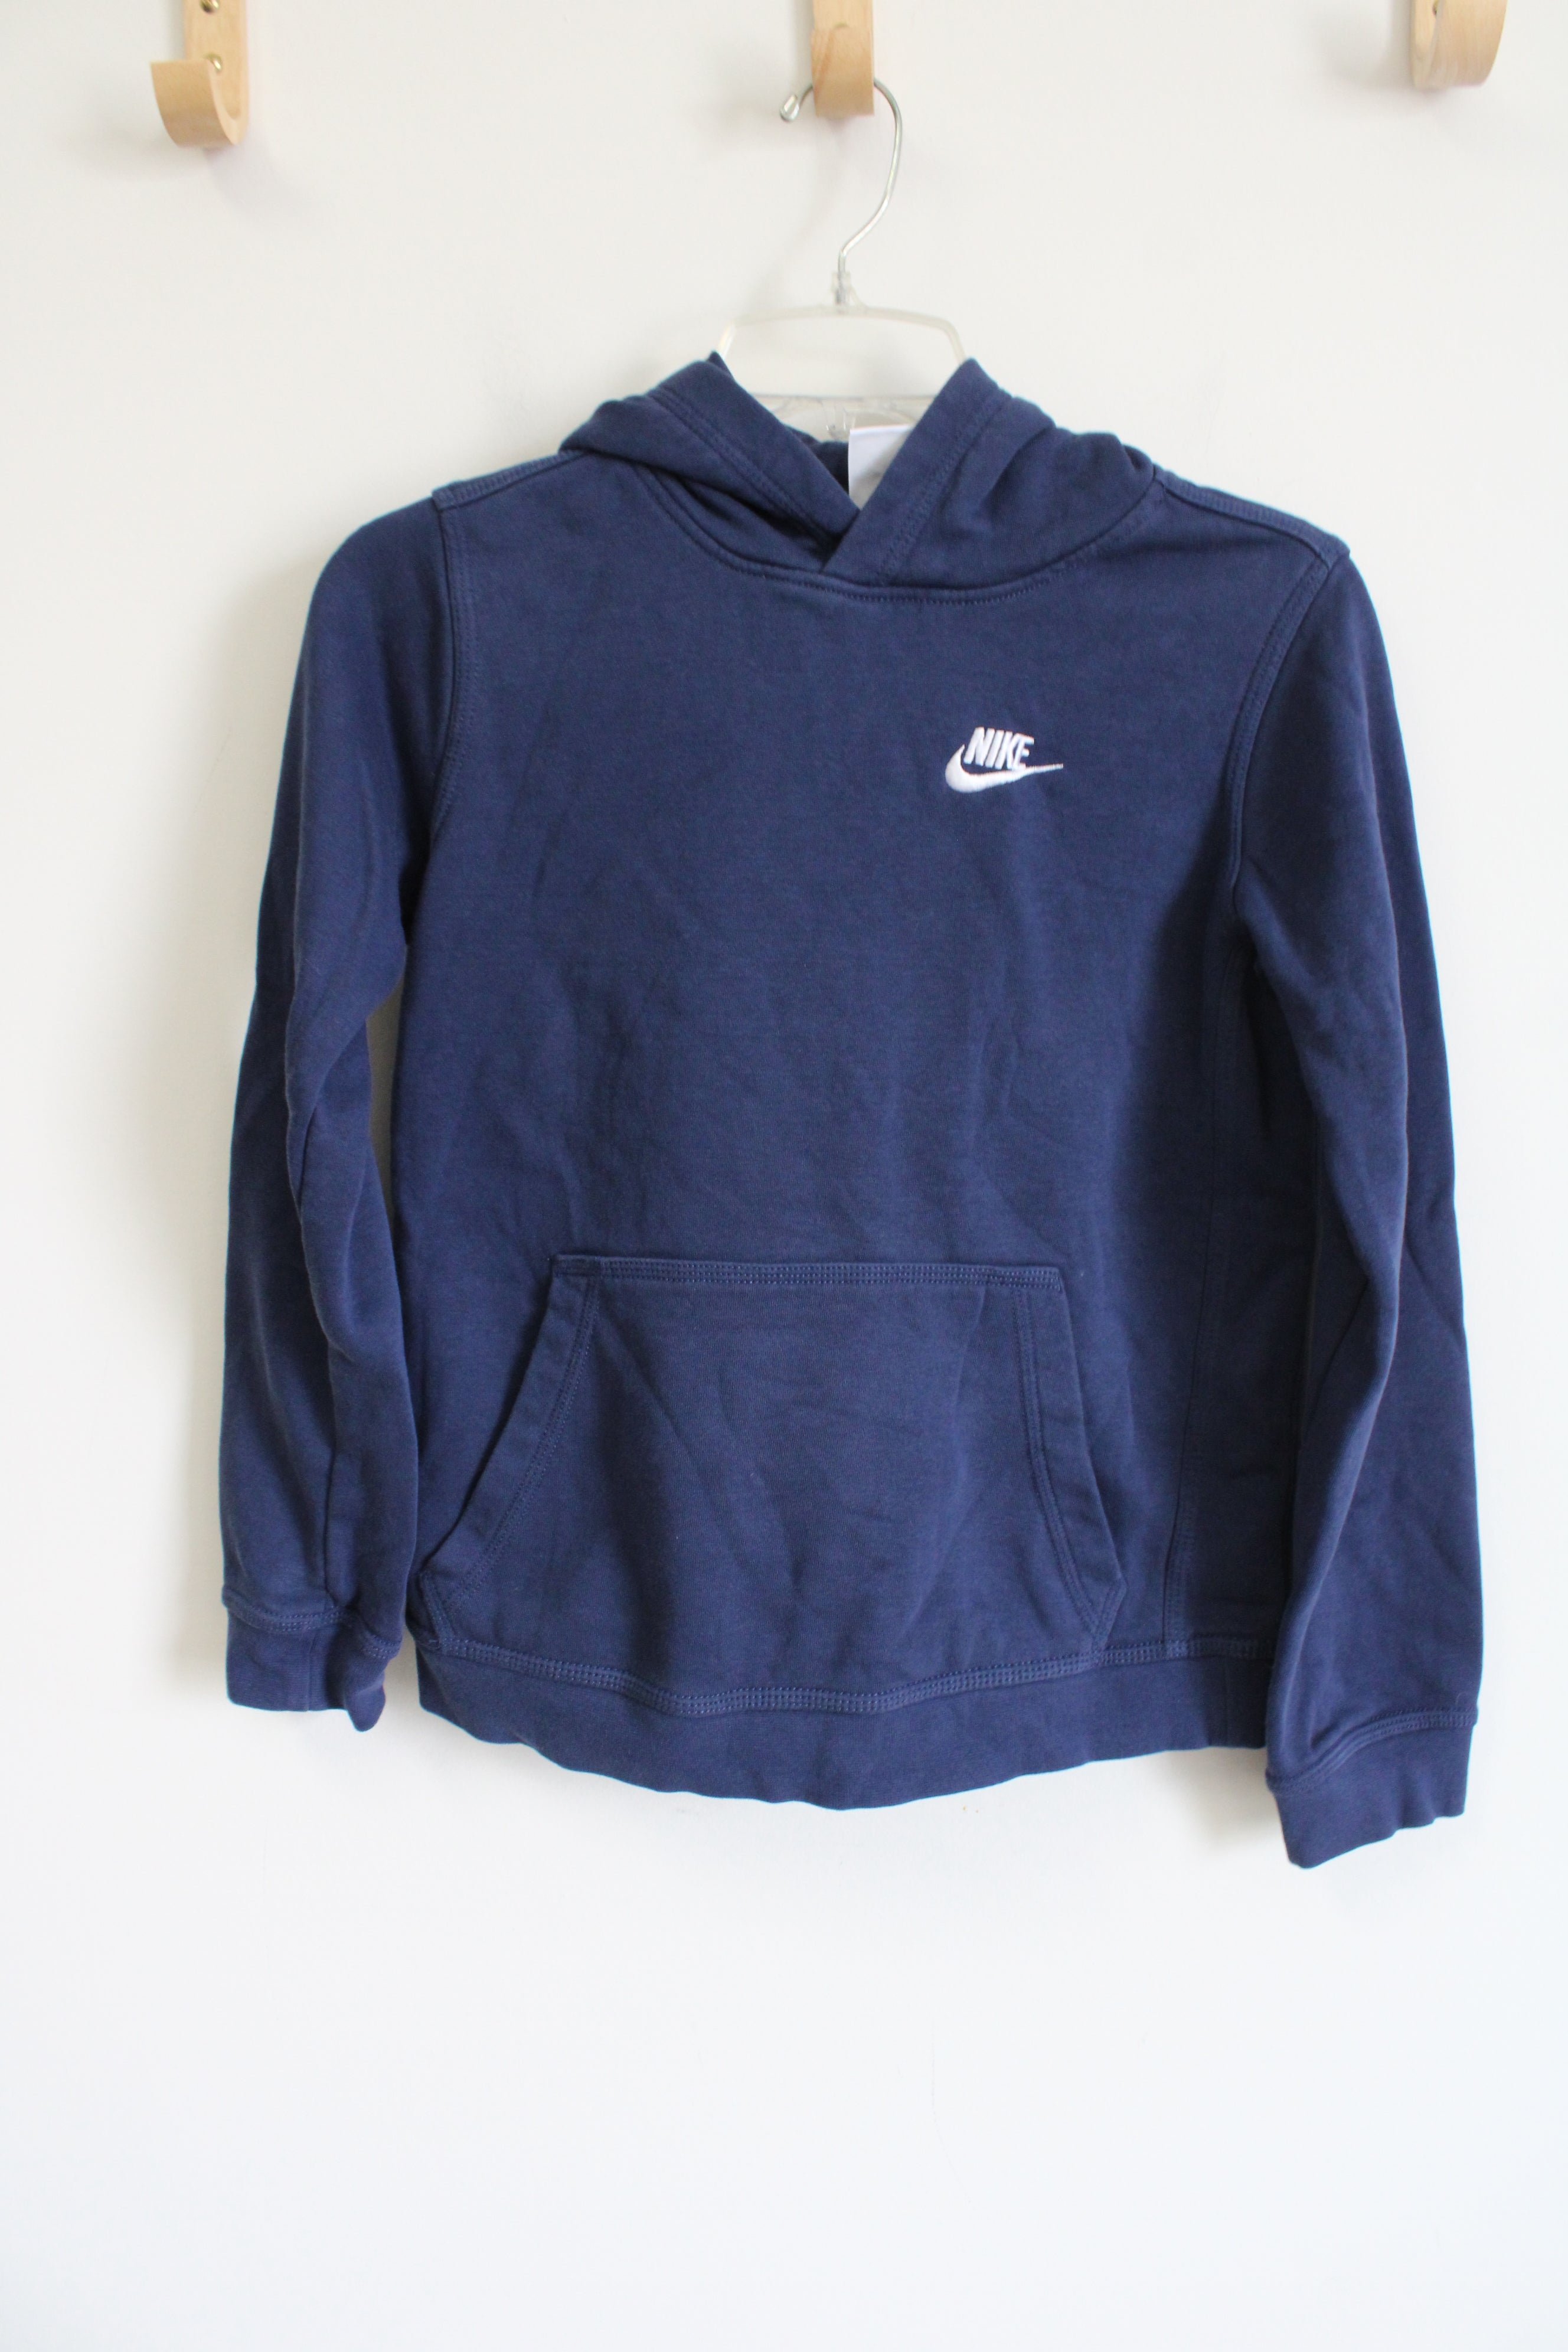 Nike Navy Blue Logo Embroidered Hoodie | Youth L (14/16)